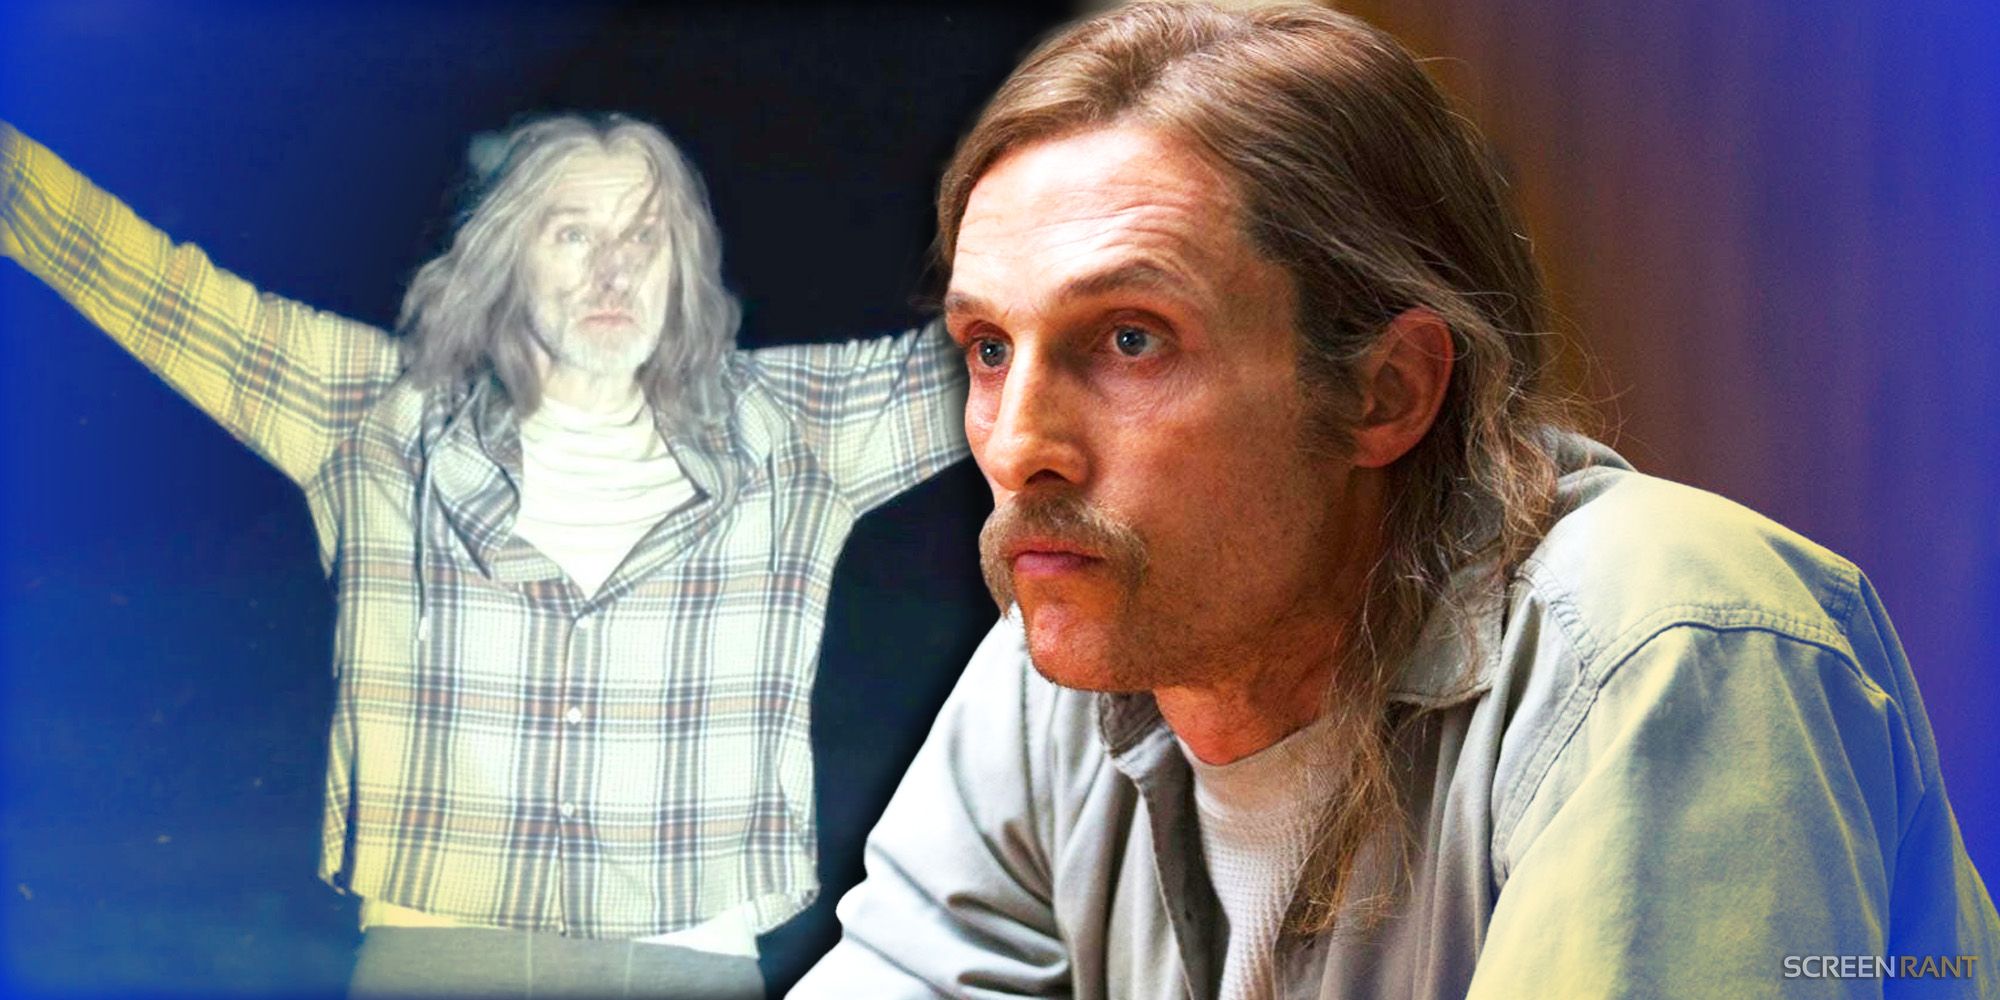 Travis Cohle with arms outstretched in True Detective Night Country, and Matthew McConaughey as Rust Cohle with long hair and mustache in True Detective season 1